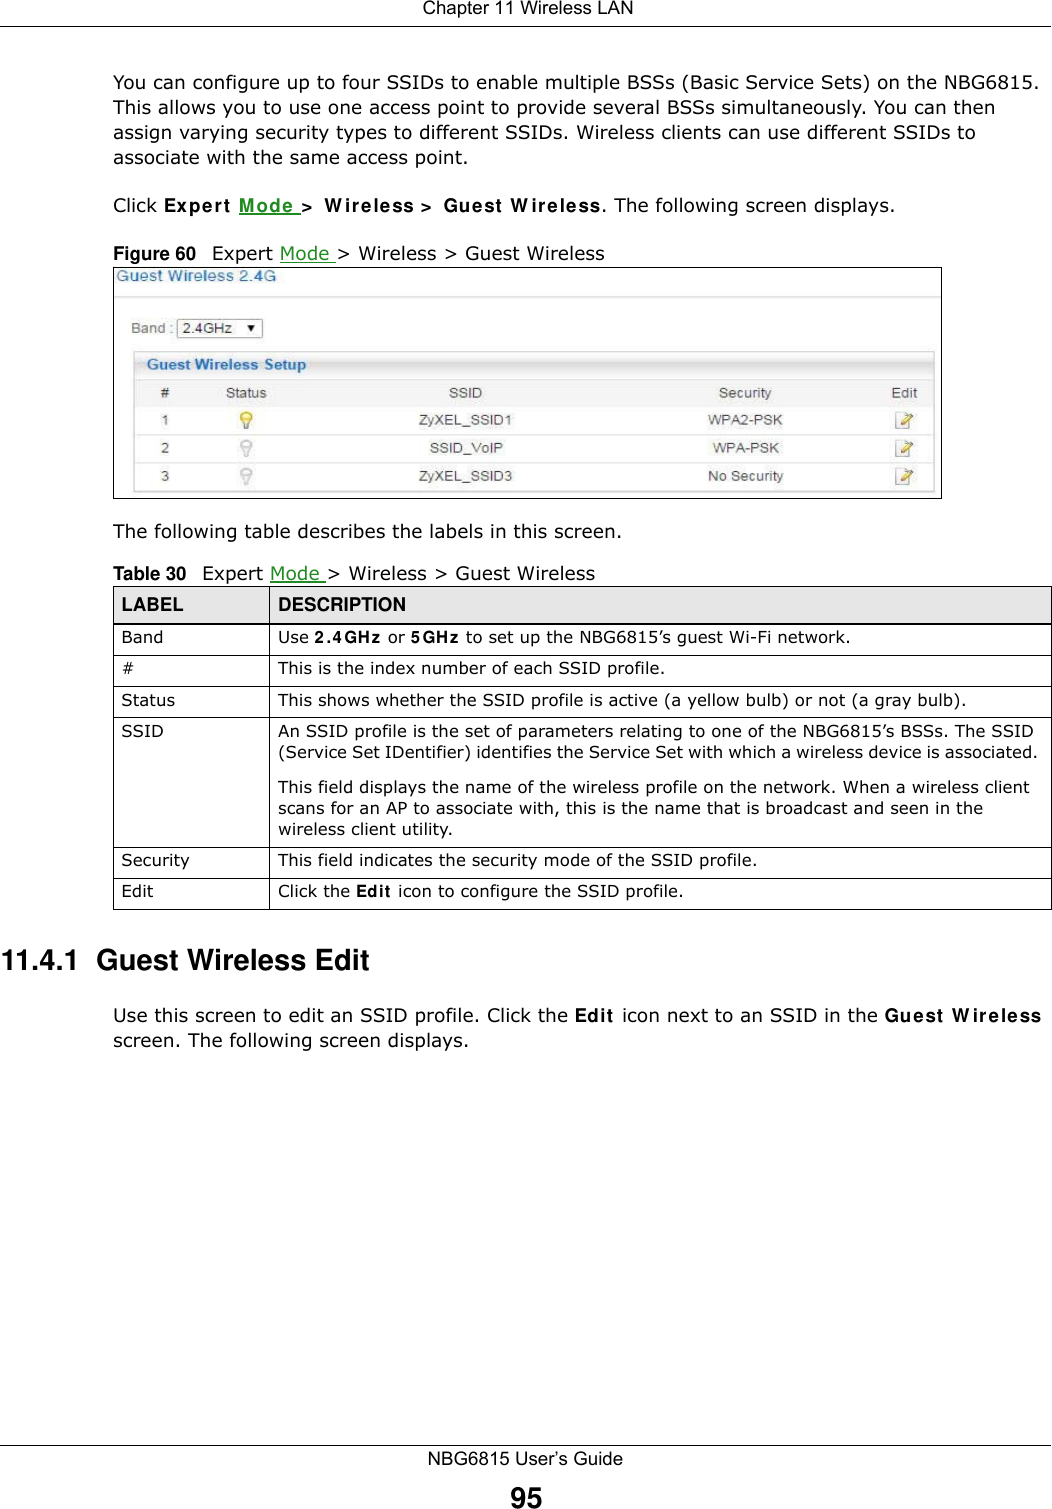  Chapter 11 Wireless LANNBG6815 User’s Guide95You can configure up to four SSIDs to enable multiple BSSs (Basic Service Sets) on the NBG6815. This allows you to use one access point to provide several BSSs simultaneously. You can then assign varying security types to different SSIDs. Wireless clients can use different SSIDs to associate with the same access point.Click Expert Mode &gt; Wireless &gt; Guest Wireless. The following screen displays.Figure 60   Expert Mode &gt; Wireless &gt; Guest WirelessThe following table describes the labels in this screen.11.4.1  Guest Wireless EditUse this screen to edit an SSID profile. Click the Edit icon next to an SSID in the Guest Wireless screen. The following screen displays.Table 30   Expert Mode &gt; Wireless &gt; Guest WirelessLABEL DESCRIPTIONBand Use 2.4GHz or 5GHz to set up the NBG6815’s guest Wi-Fi network.#This is the index number of each SSID profile. Status This shows whether the SSID profile is active (a yellow bulb) or not (a gray bulb).SSID An SSID profile is the set of parameters relating to one of the NBG6815’s BSSs. The SSID (Service Set IDentifier) identifies the Service Set with which a wireless device is associated. This field displays the name of the wireless profile on the network. When a wireless client scans for an AP to associate with, this is the name that is broadcast and seen in the wireless client utility.Security This field indicates the security mode of the SSID profile.Edit Click the Edit icon to configure the SSID profile.